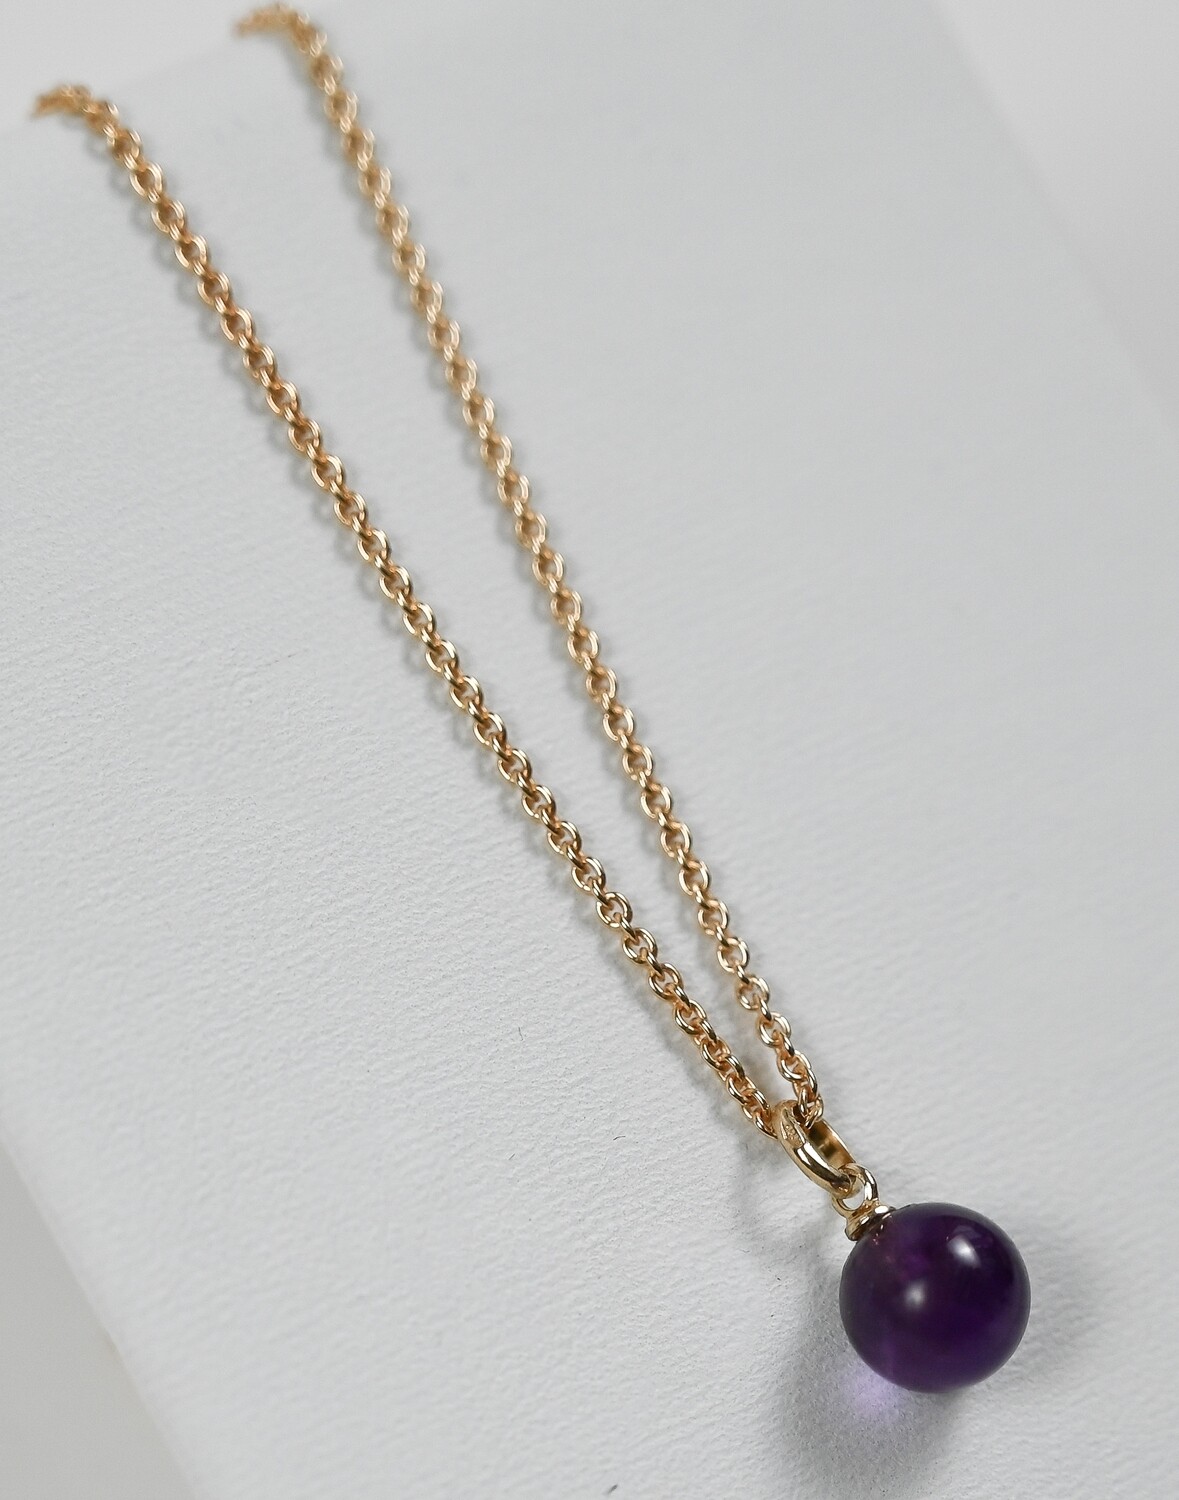 GOLDEN DROPS pendant, made of 14 ct. yellow gold and 8,0 mm. purple amethyst. Handmade by Helle Hennie